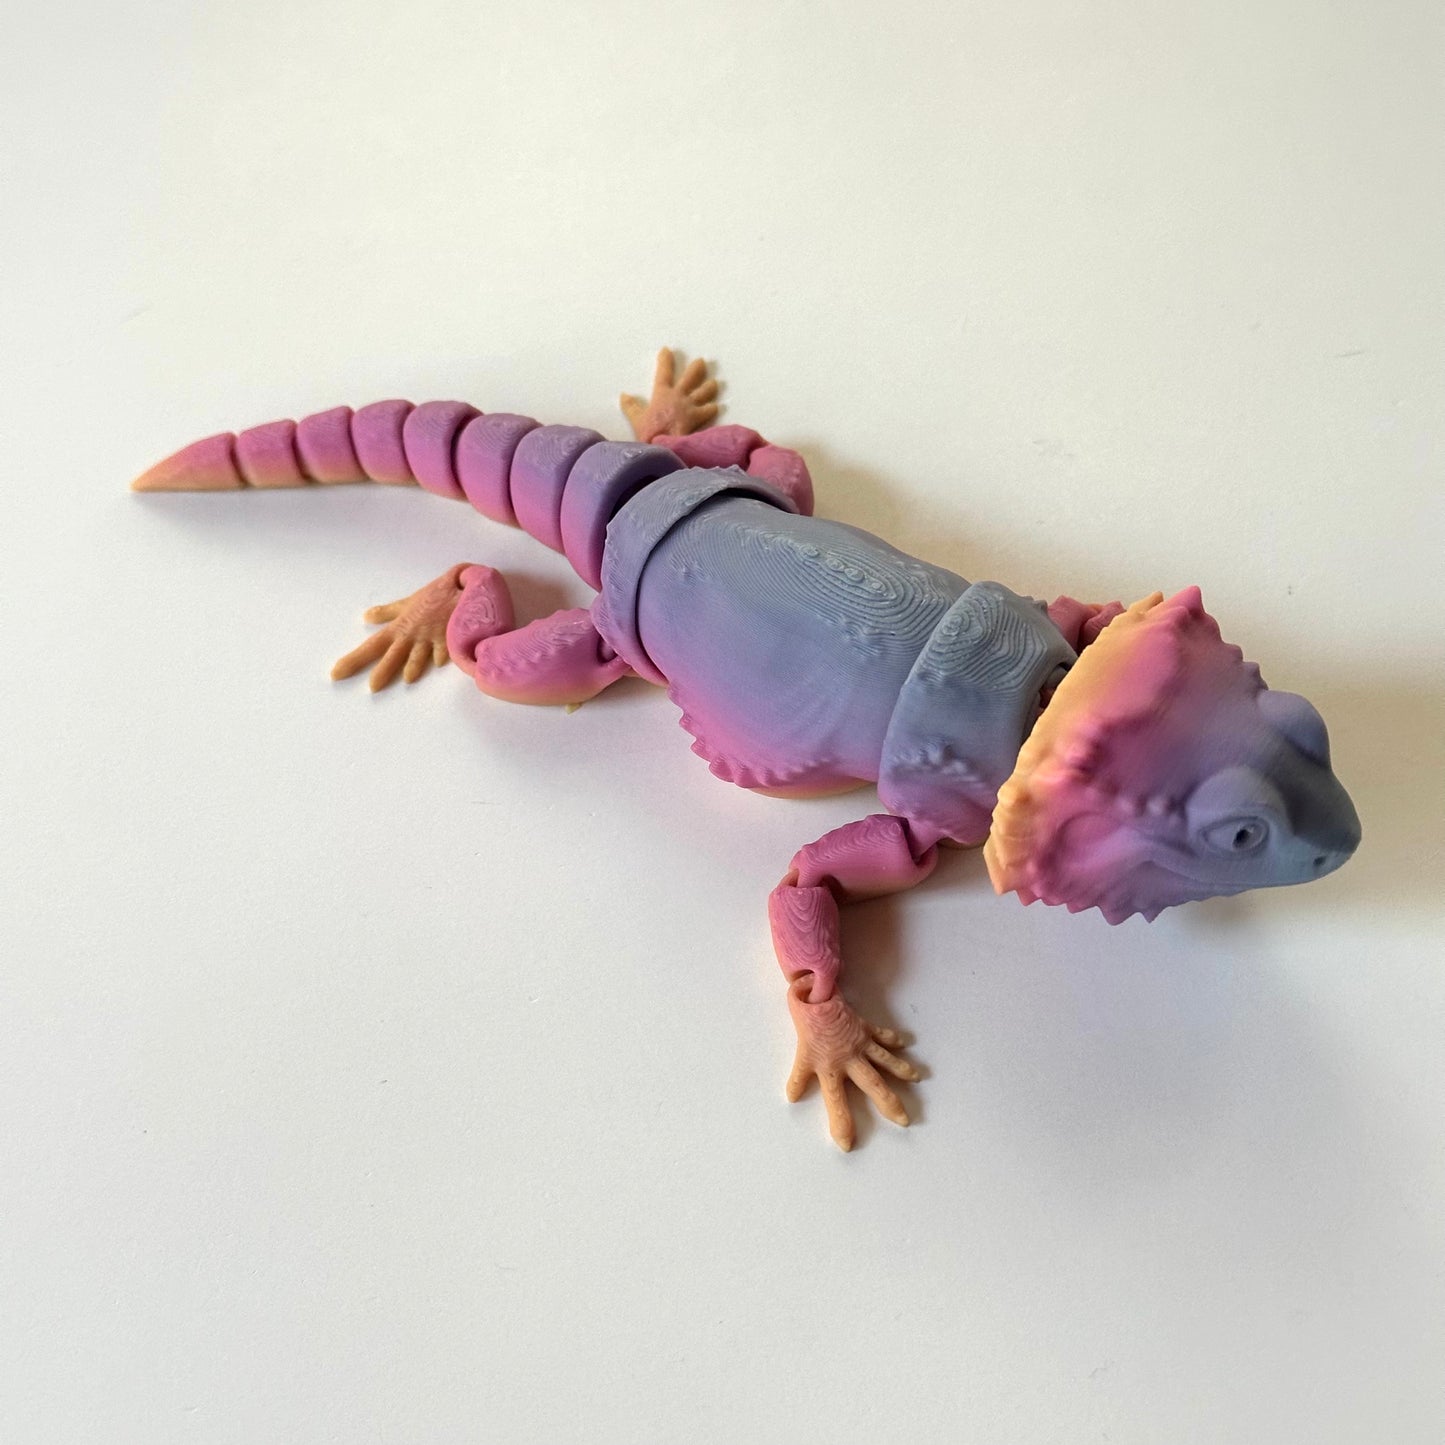 Bearded Dragon - 3D Printed Articulating Figure No